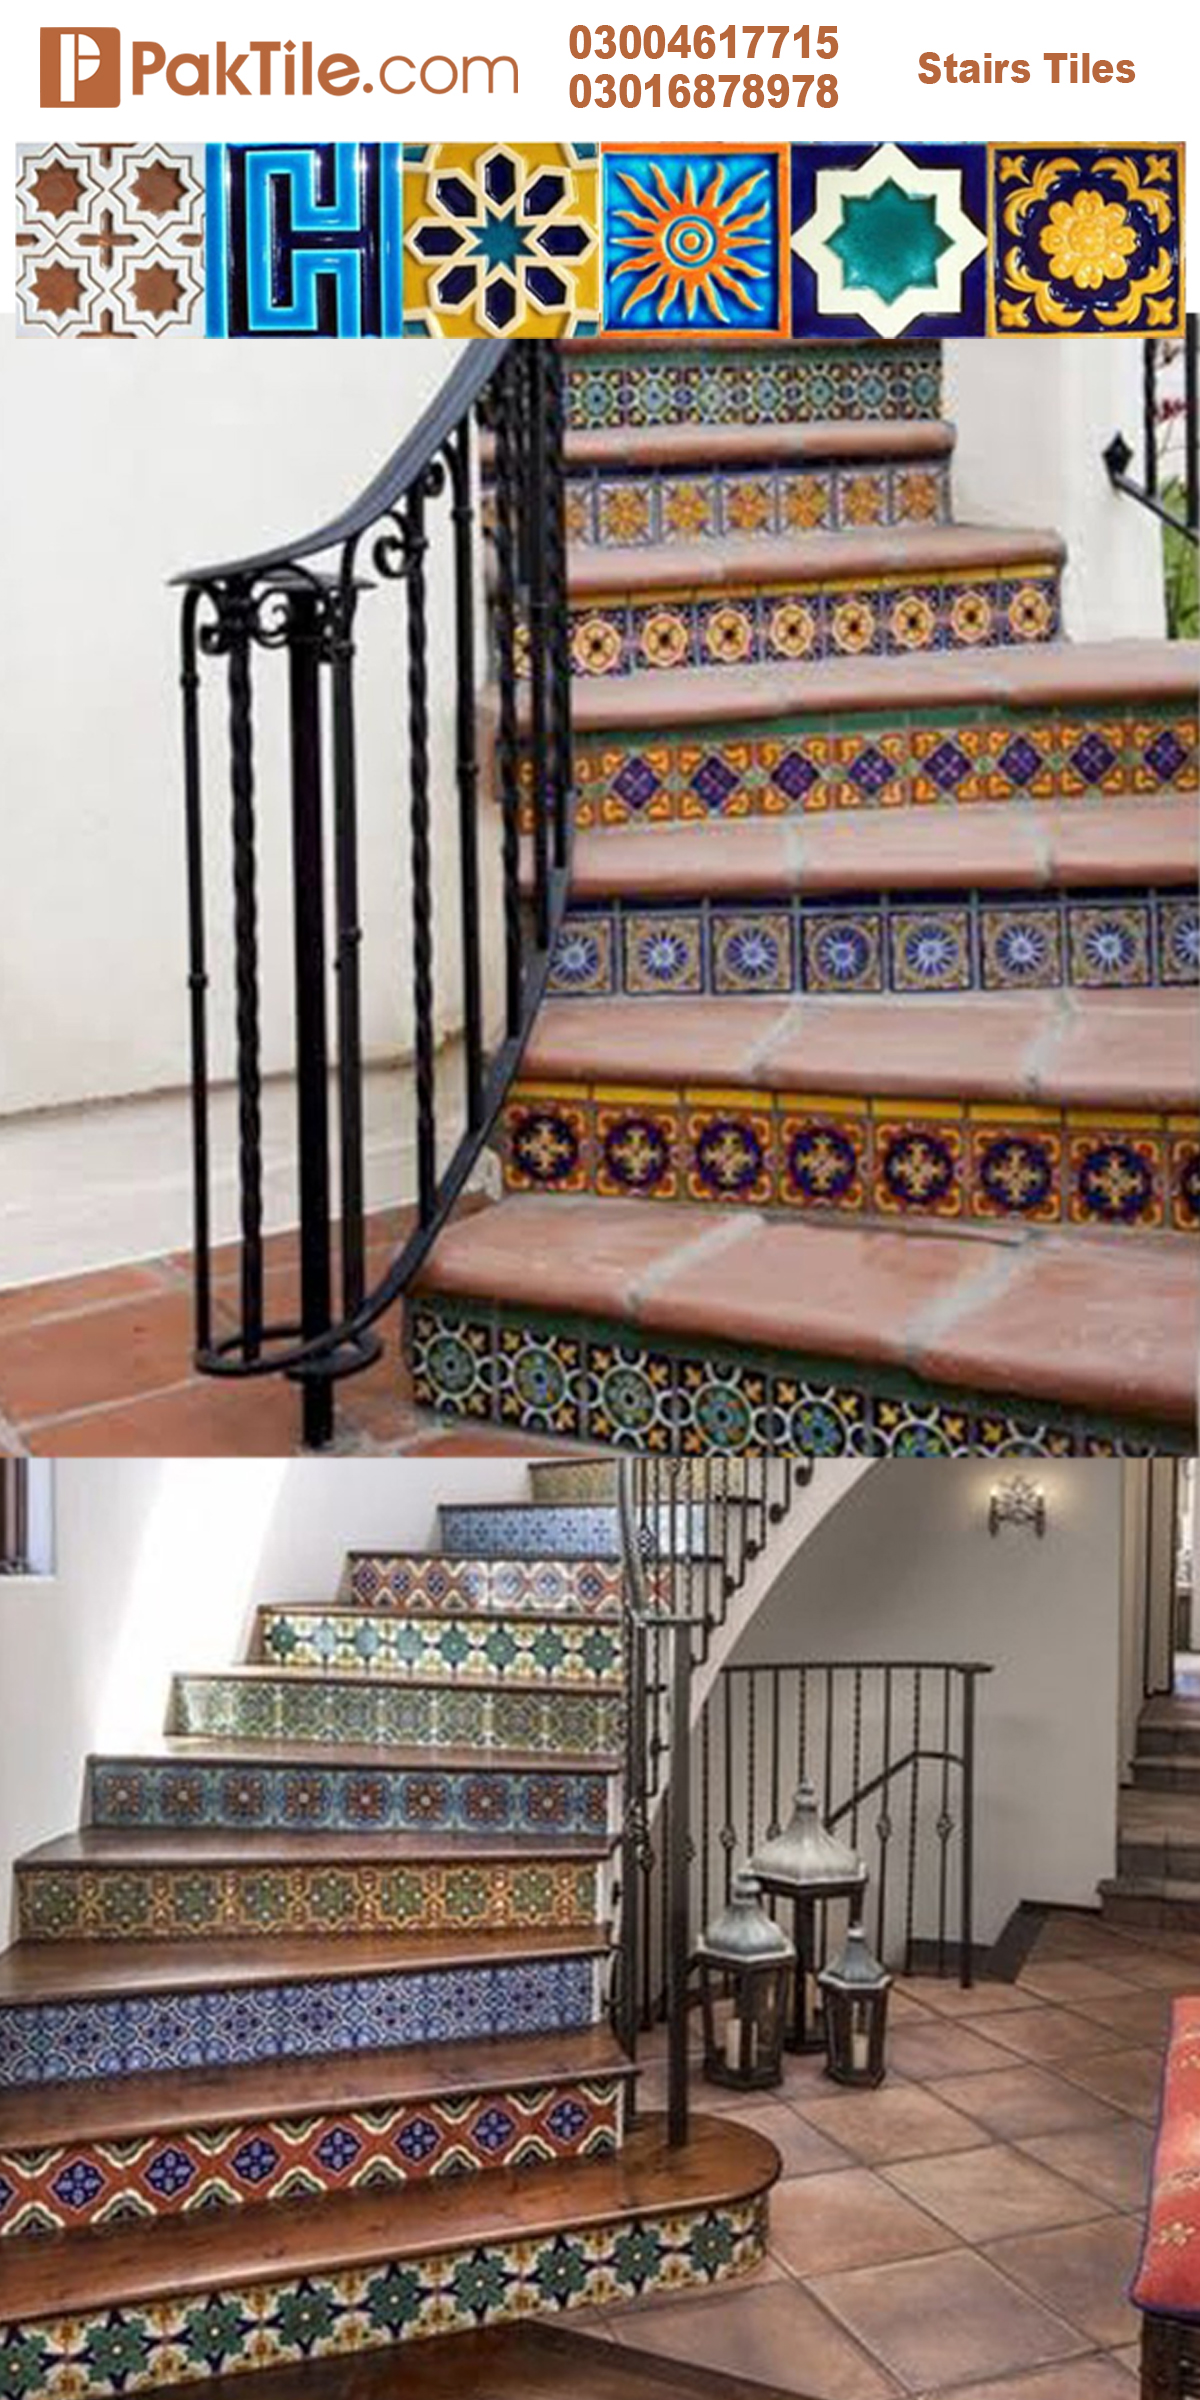 Pak Clay Tiles for Stairs Design